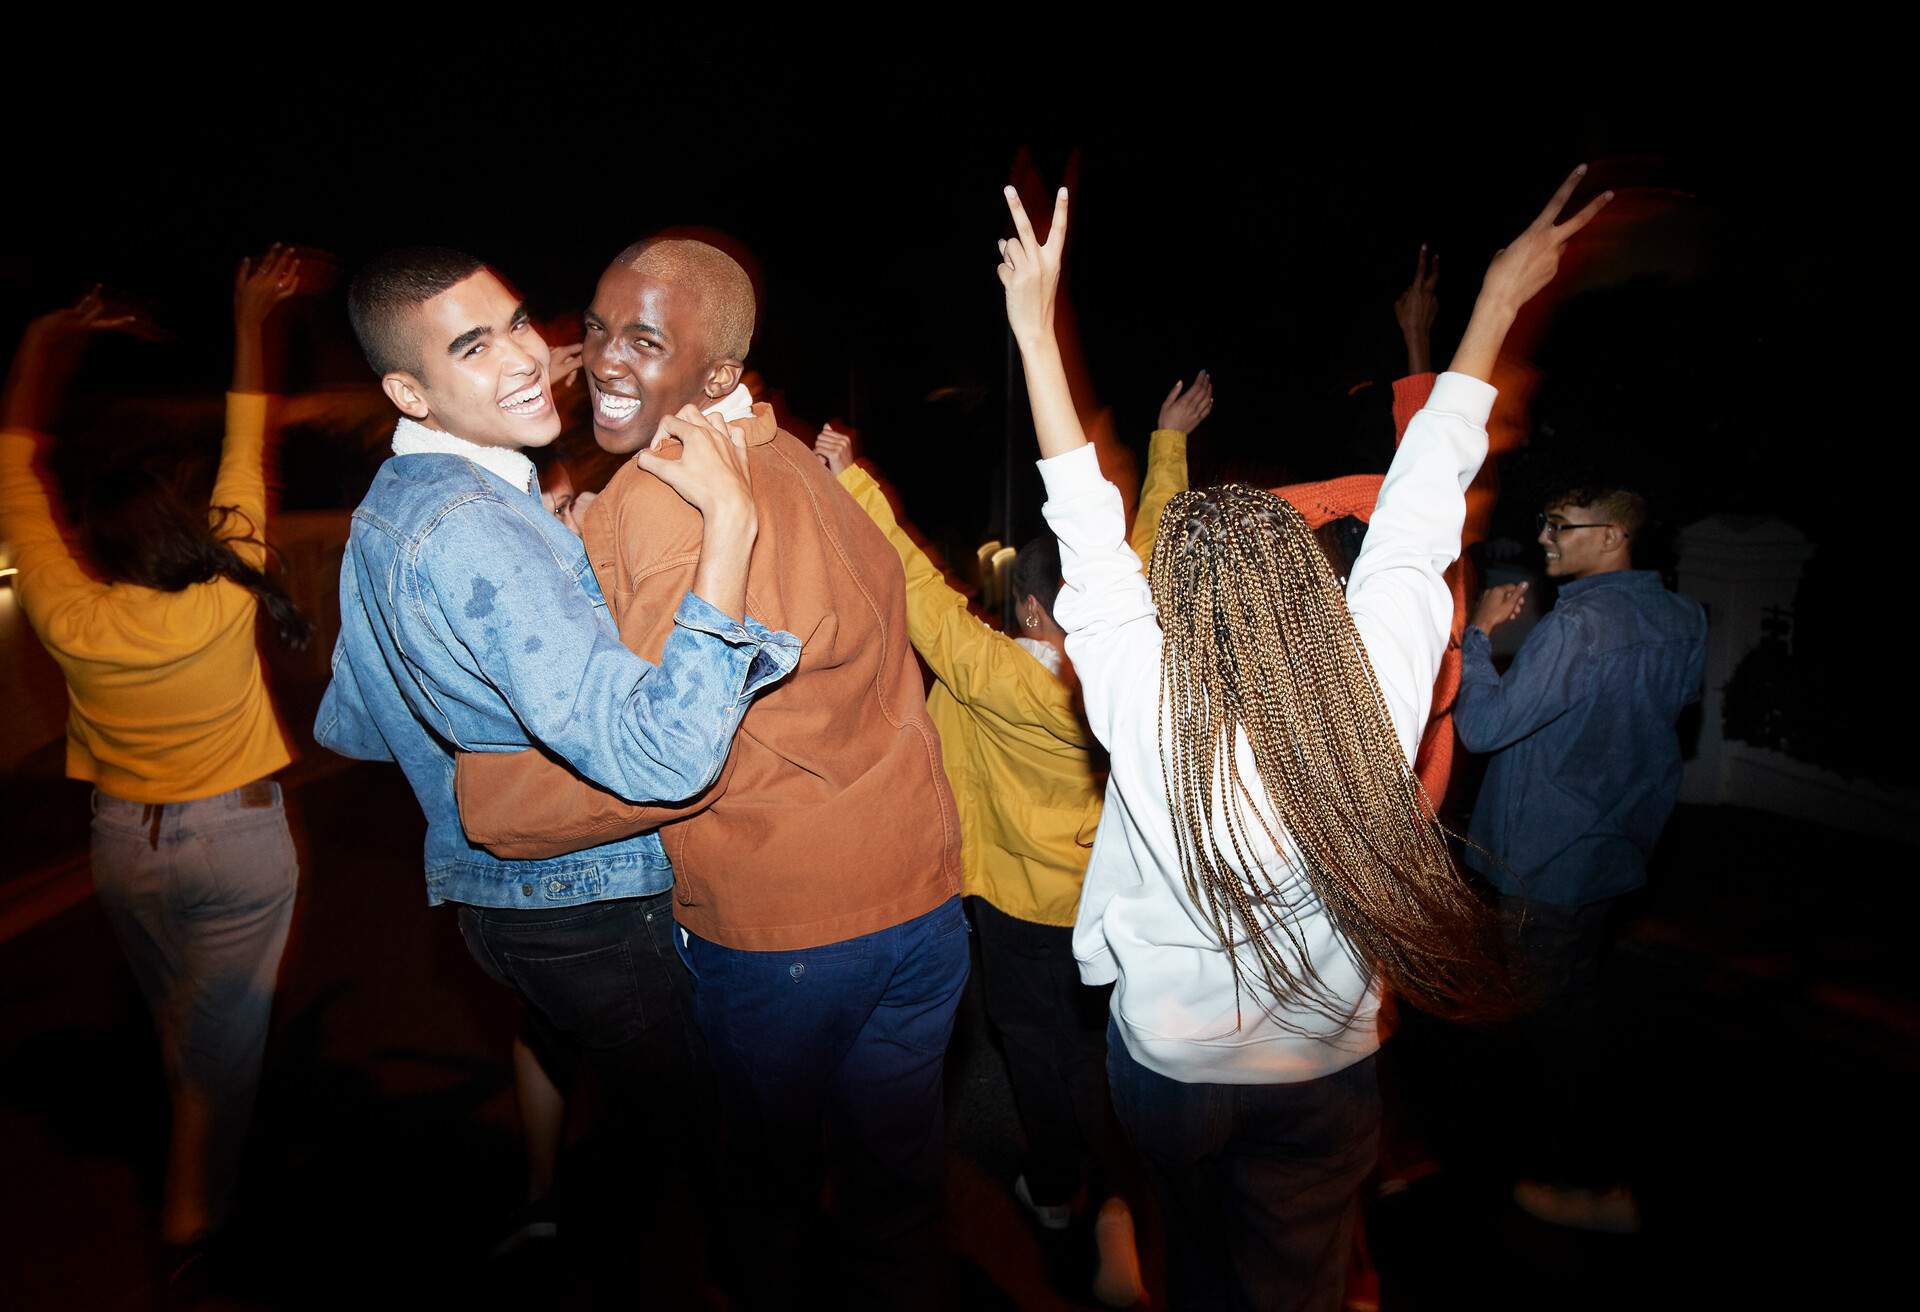 Portrait of cheerful young men dancing with multi-ethnic friends at night